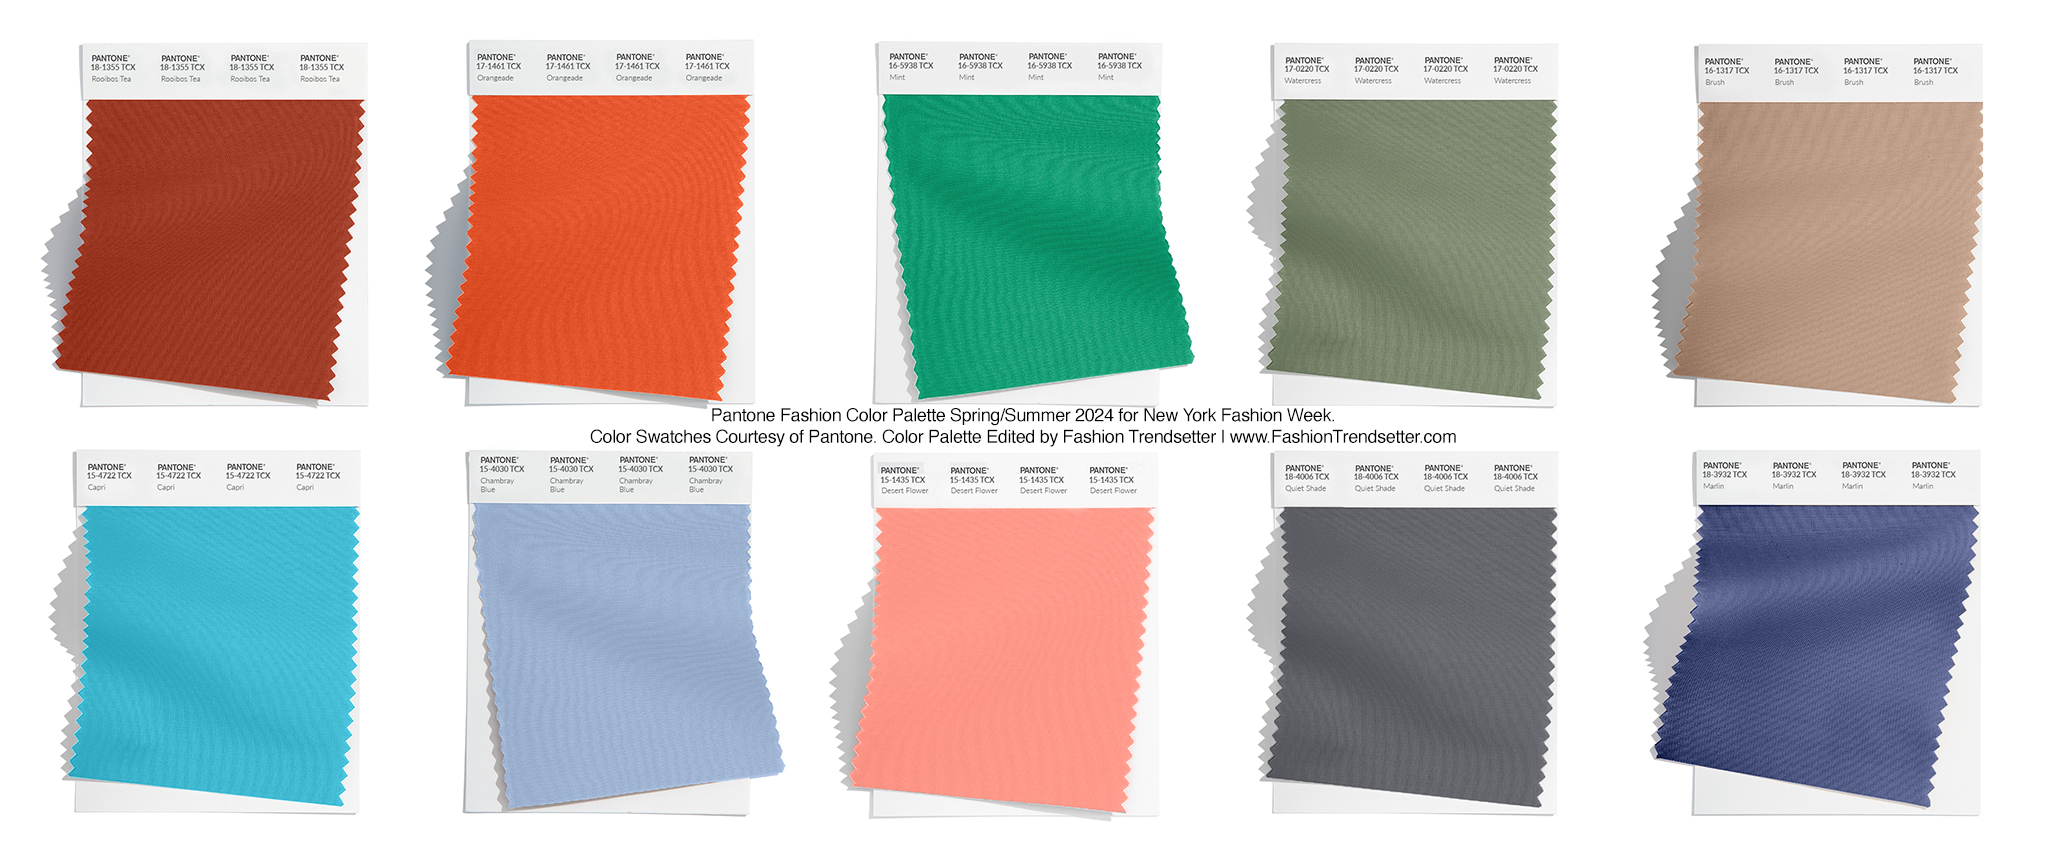 Pantone Fashion Color Trend Report Spring/Summer 2024 For New York